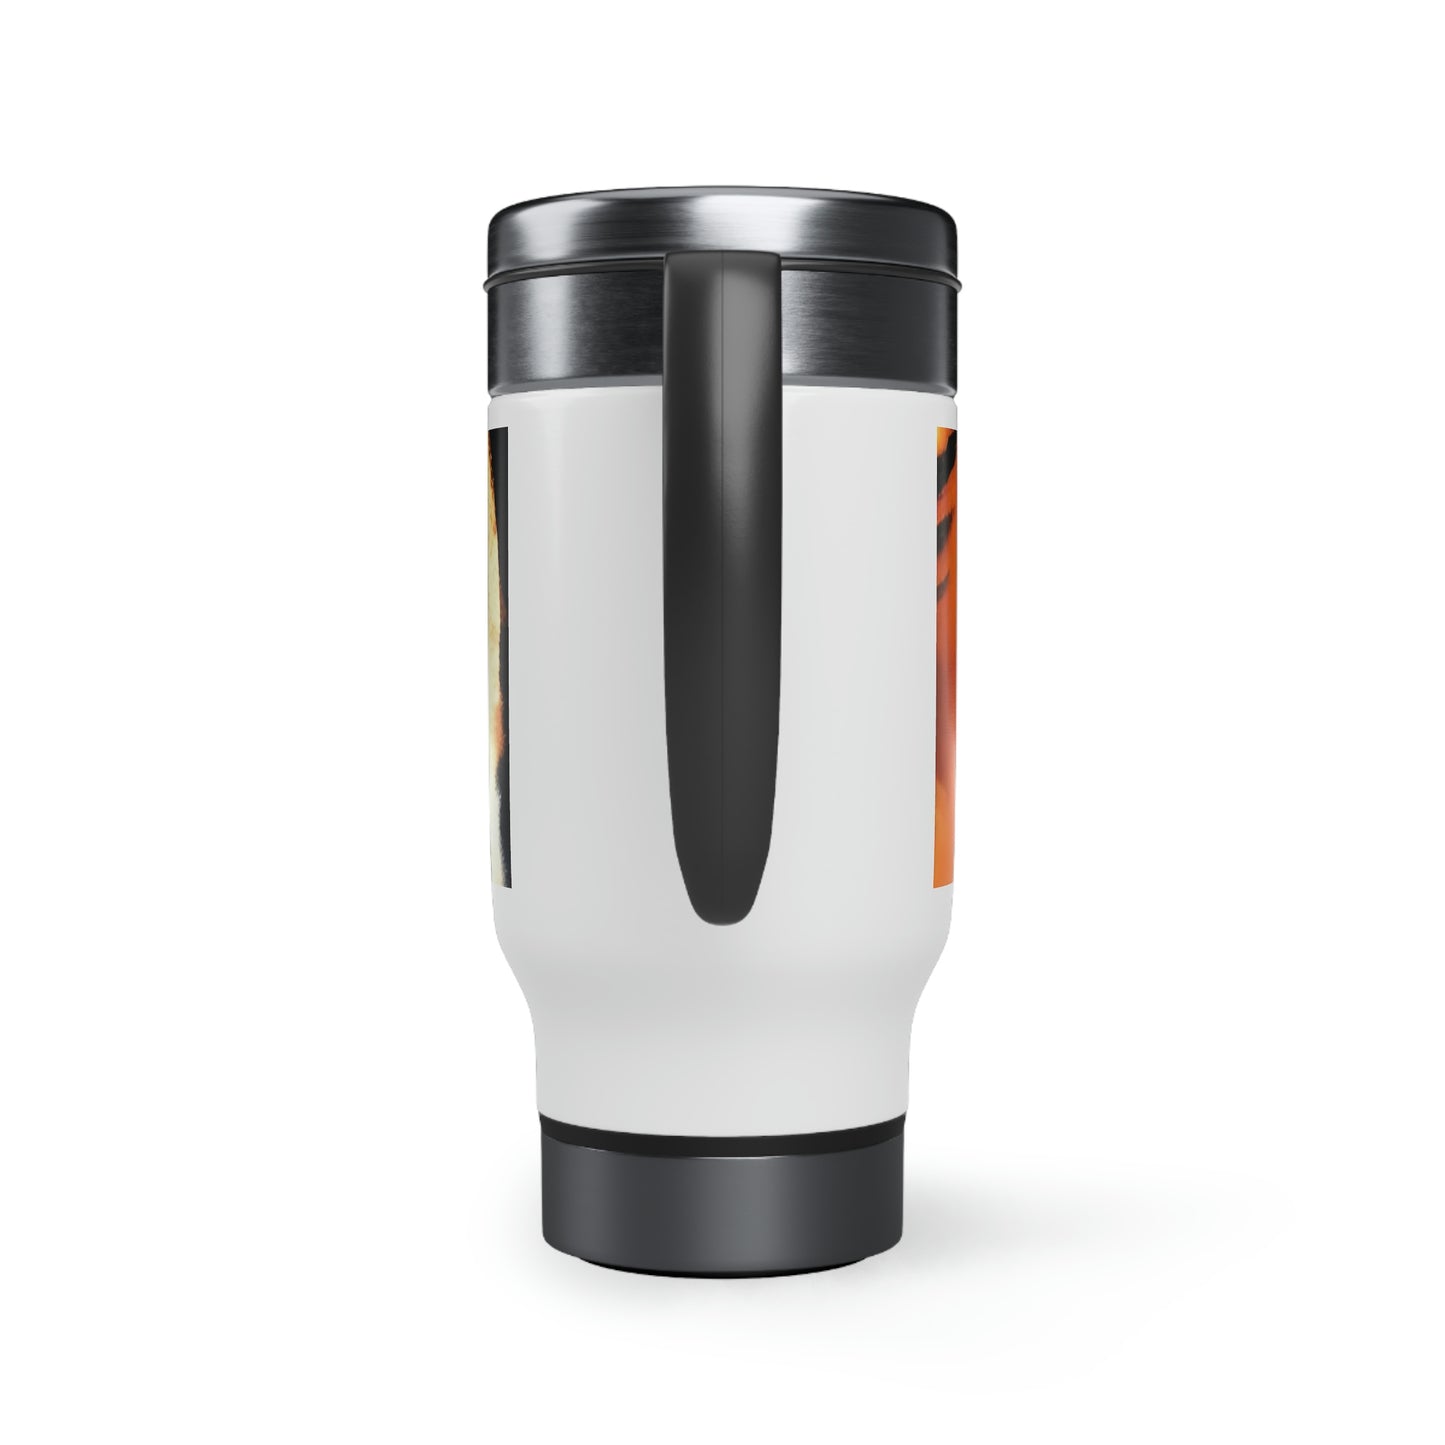 TIGER - Stainless Steel Travel Mug with Handle, 14oz